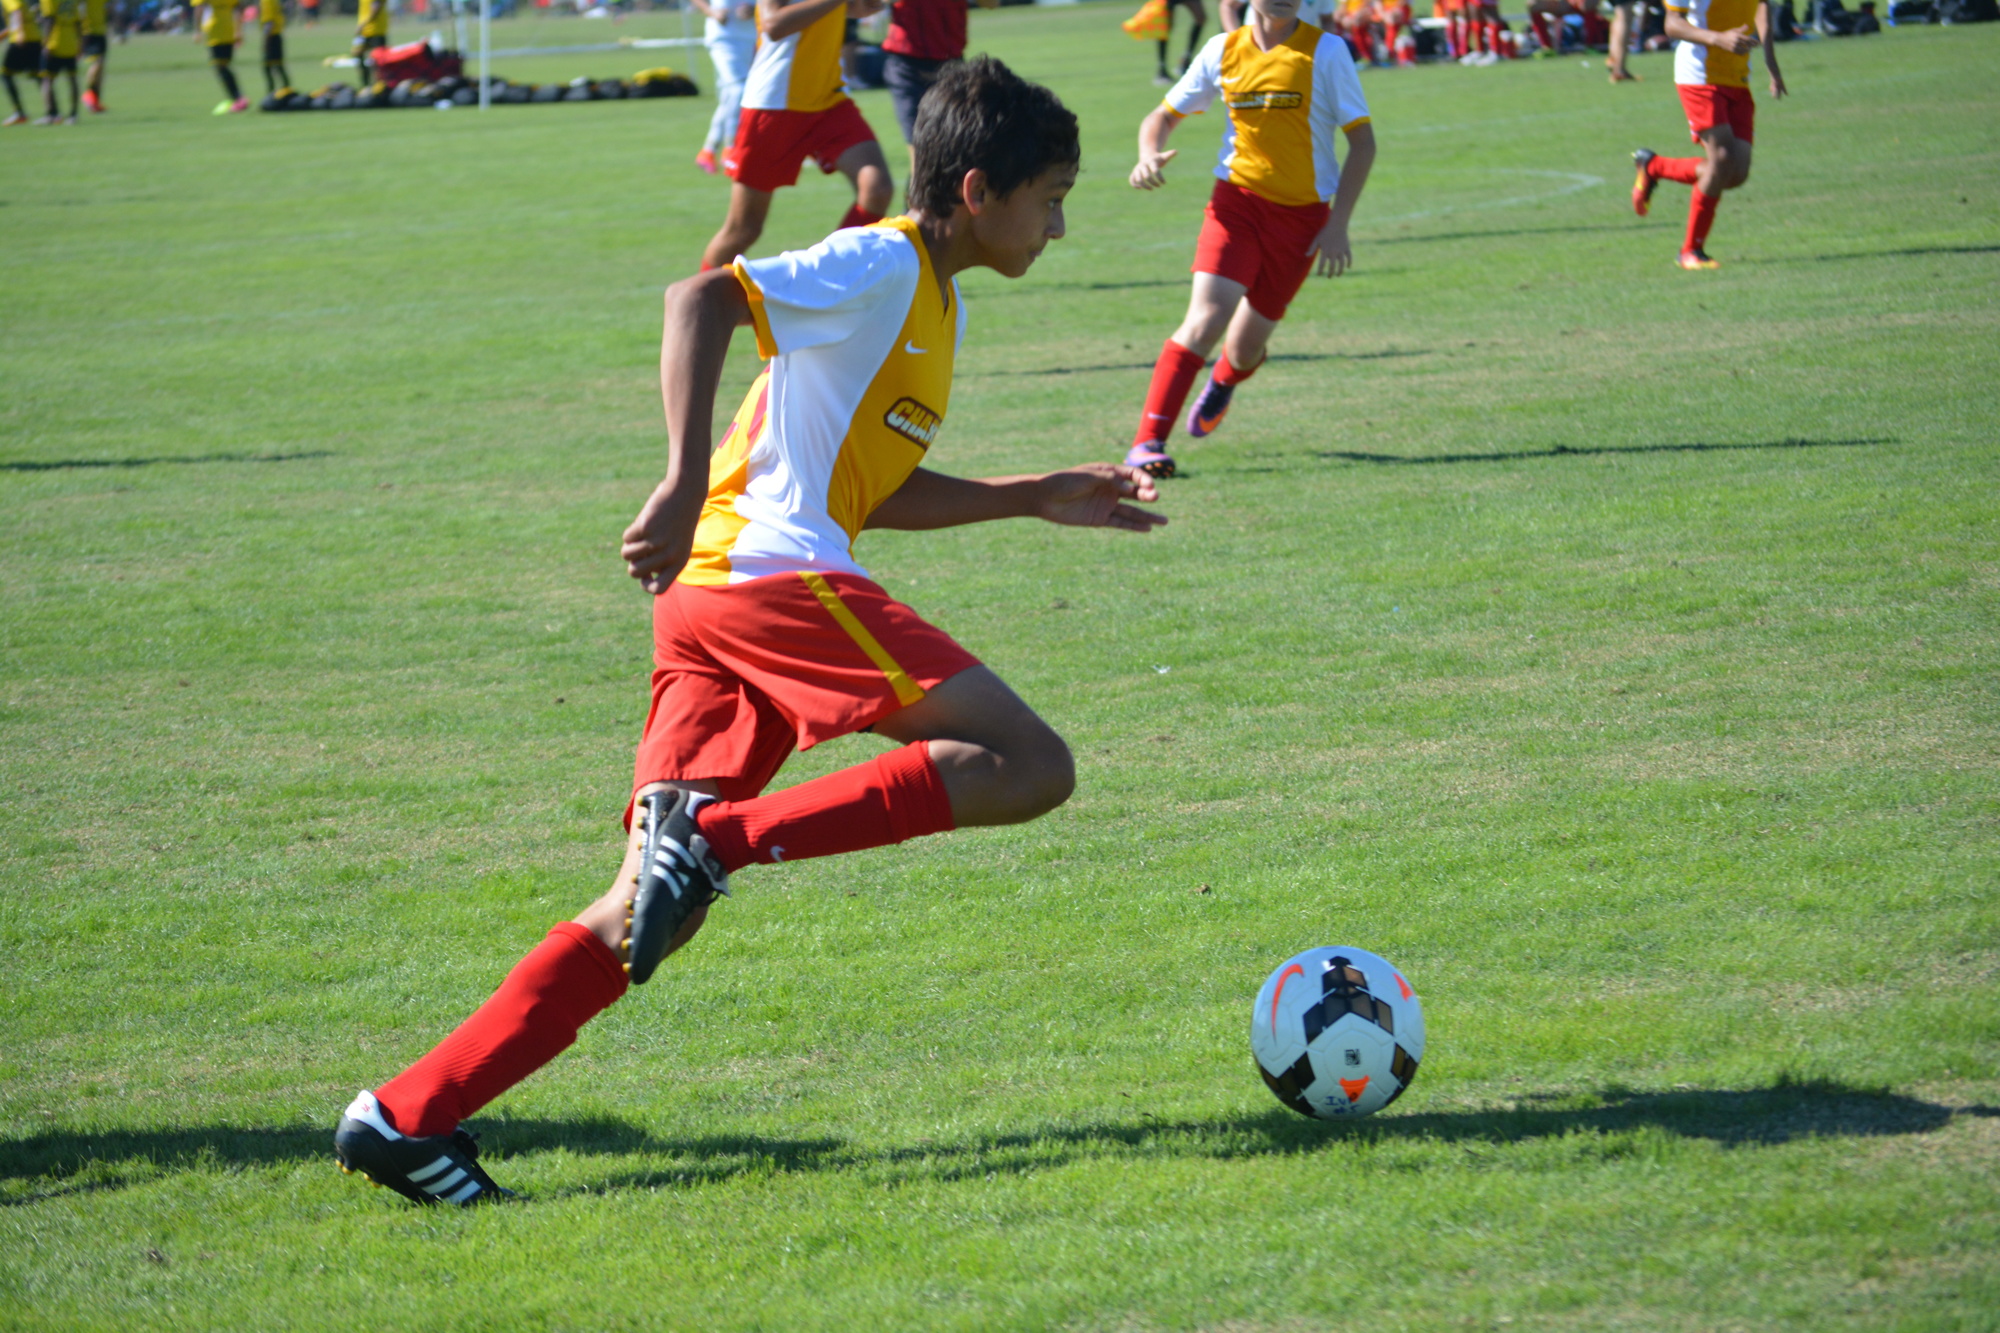 Lakewood Ranch Chargers U16 player Jaylen Besse dribbles the ball upfield.